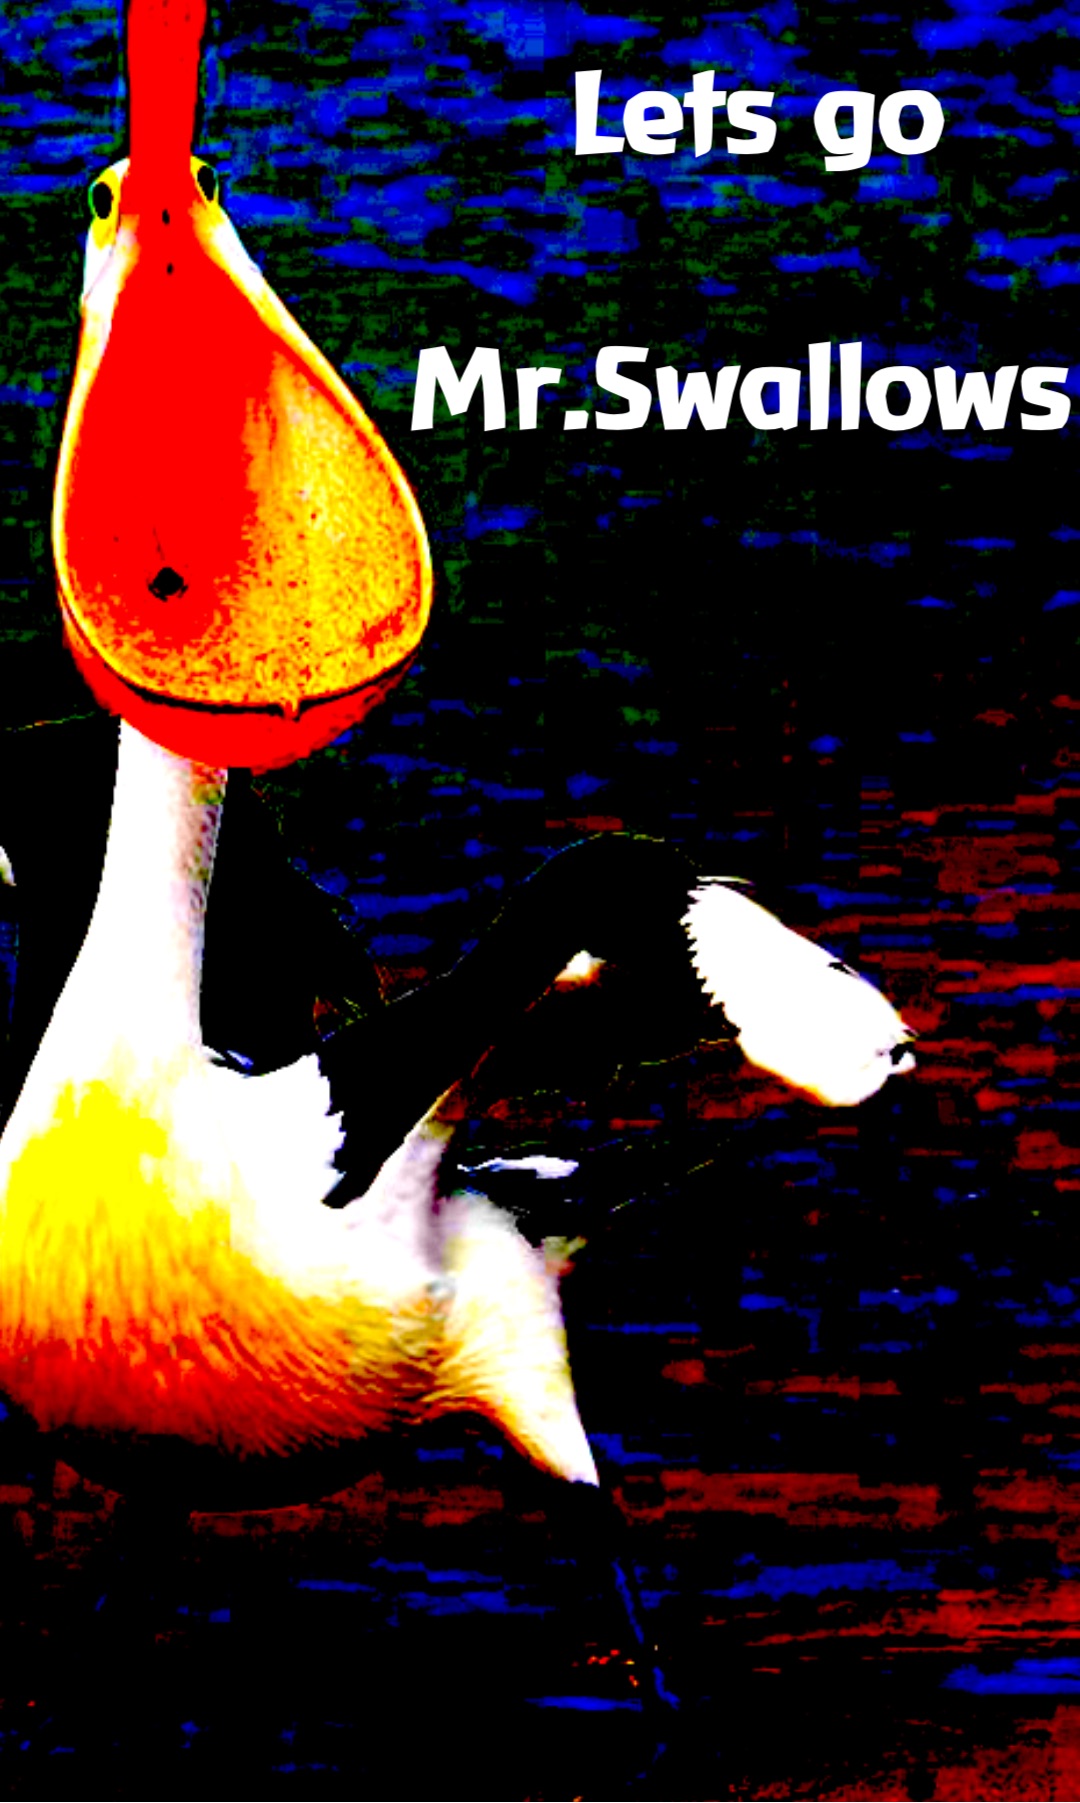 Lets go 

Mr.Swallows